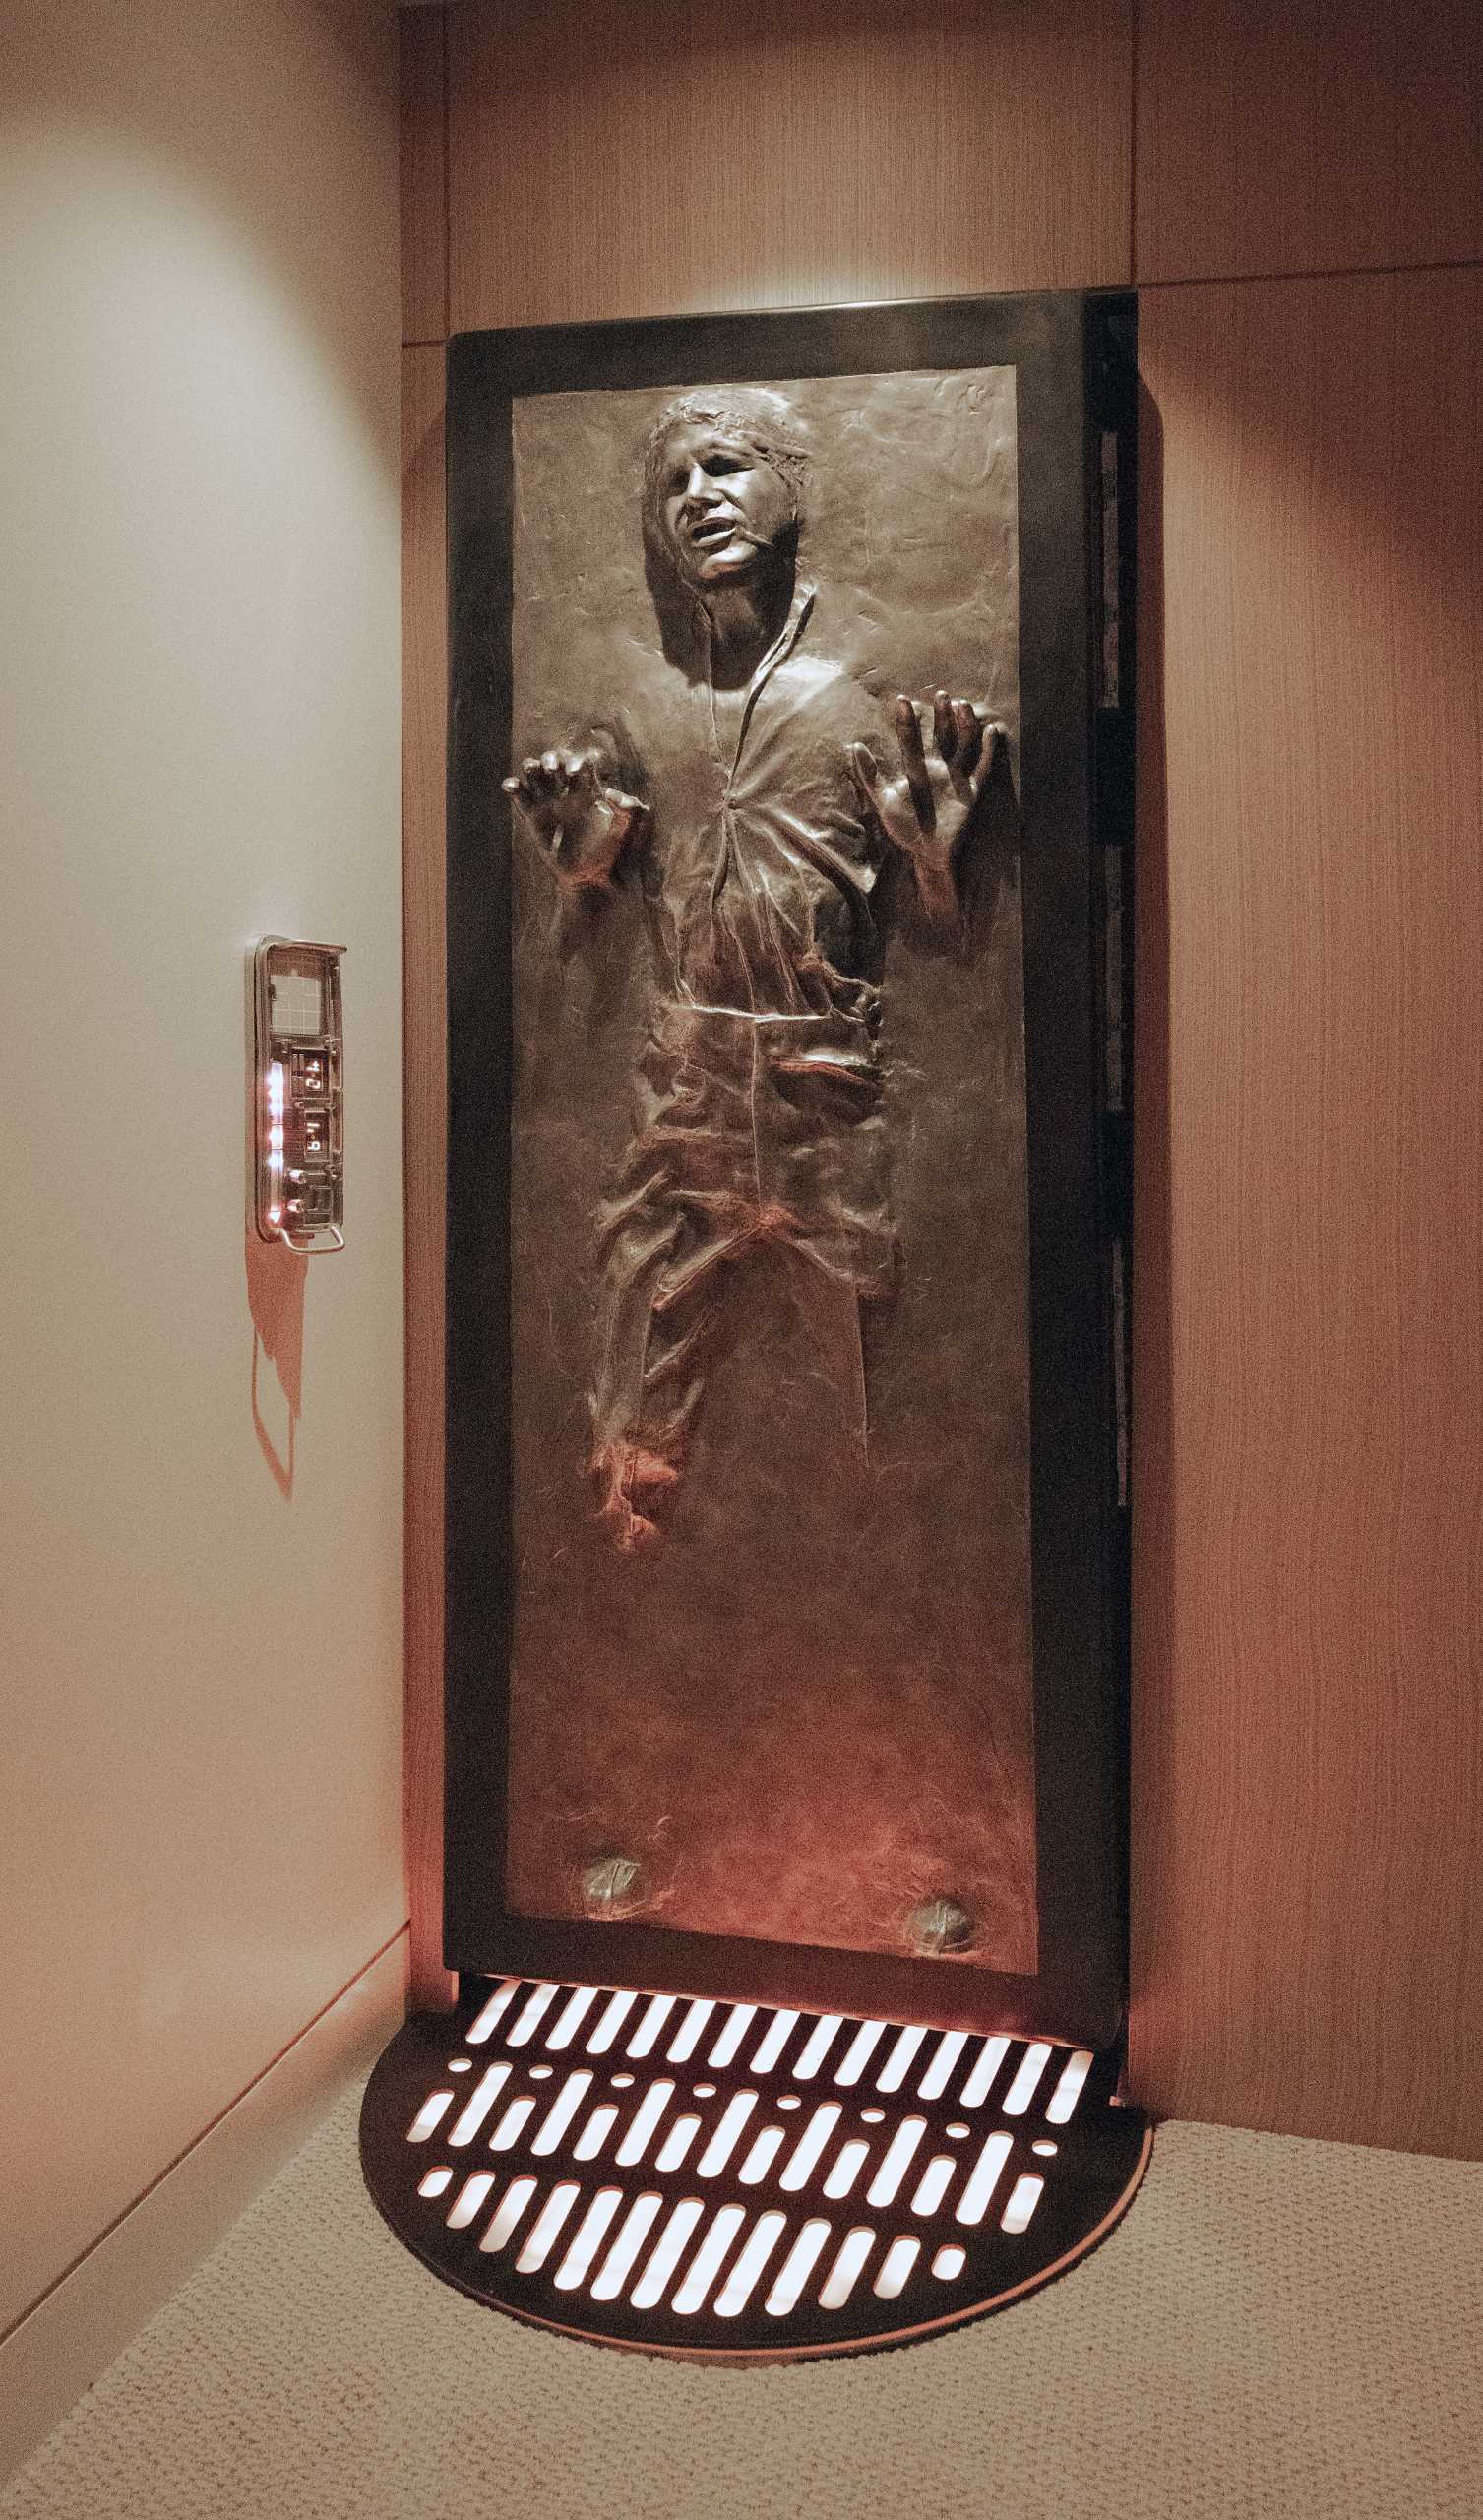 A modern home includes a ‘carbonite Han Solo’ door flush in a wall that ‘beep-boops’, that leads to a surprising Ninja Room.